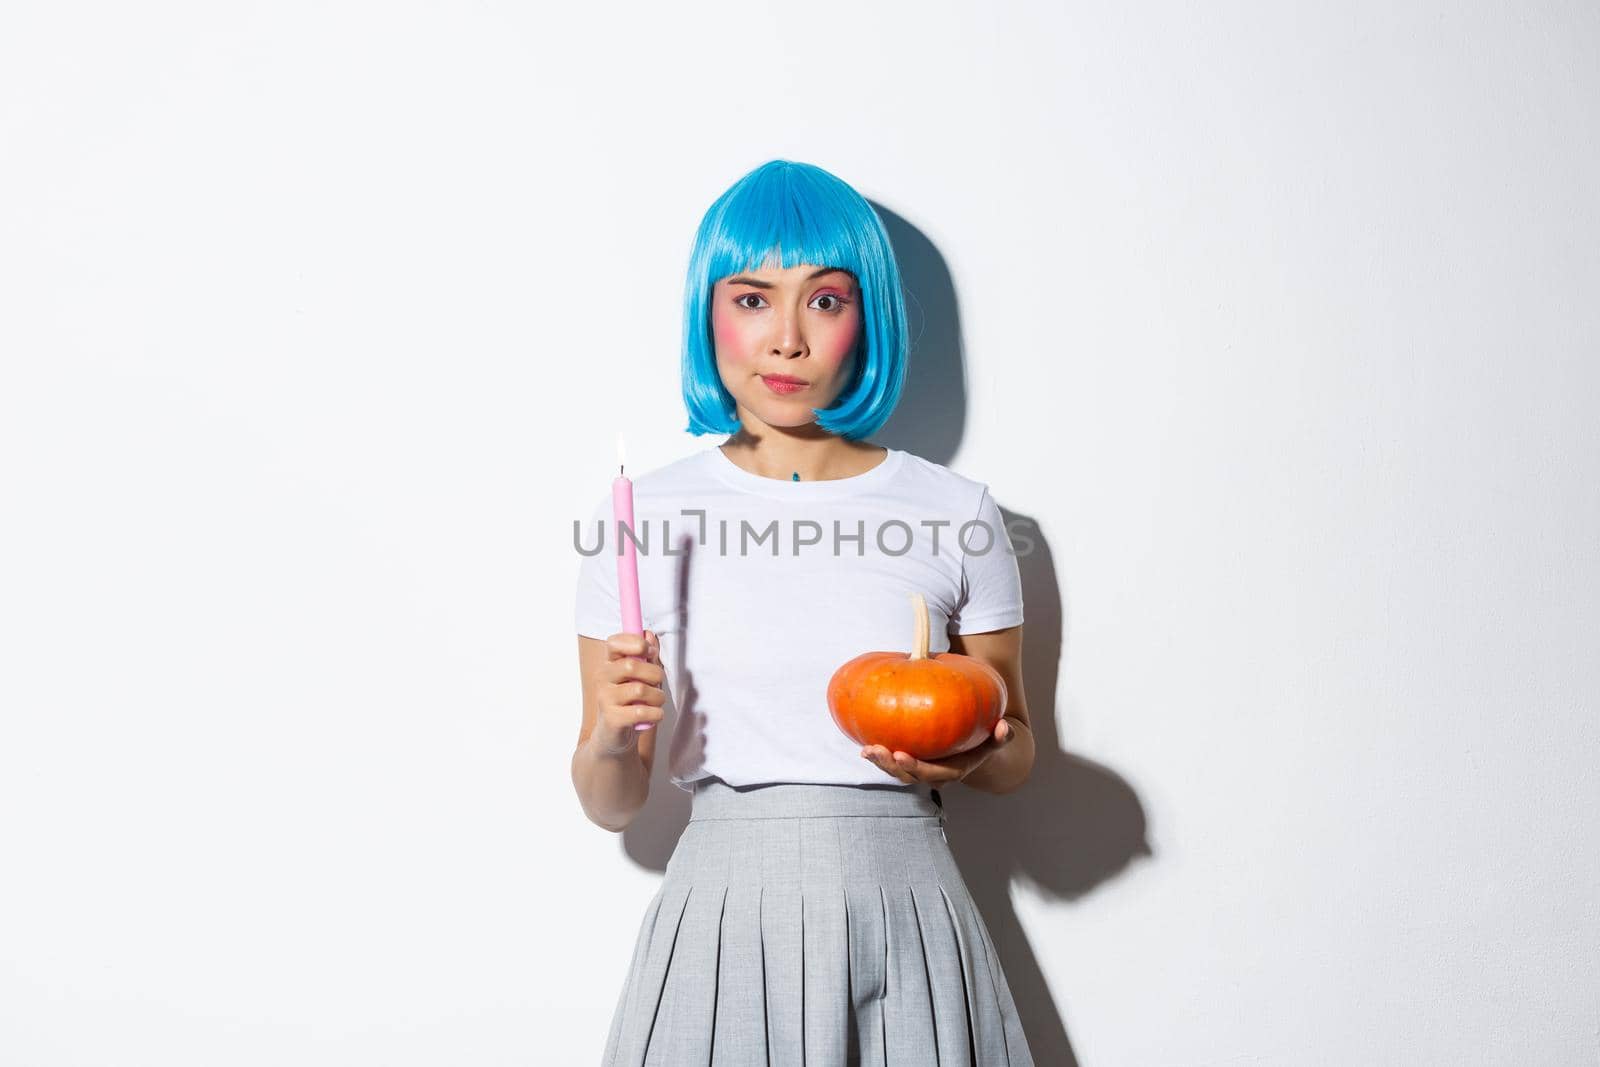 Concept of halloween. Image of attractive skeptical asian girl in blue wig, holding candle and pumpkin, looking serious at camera.